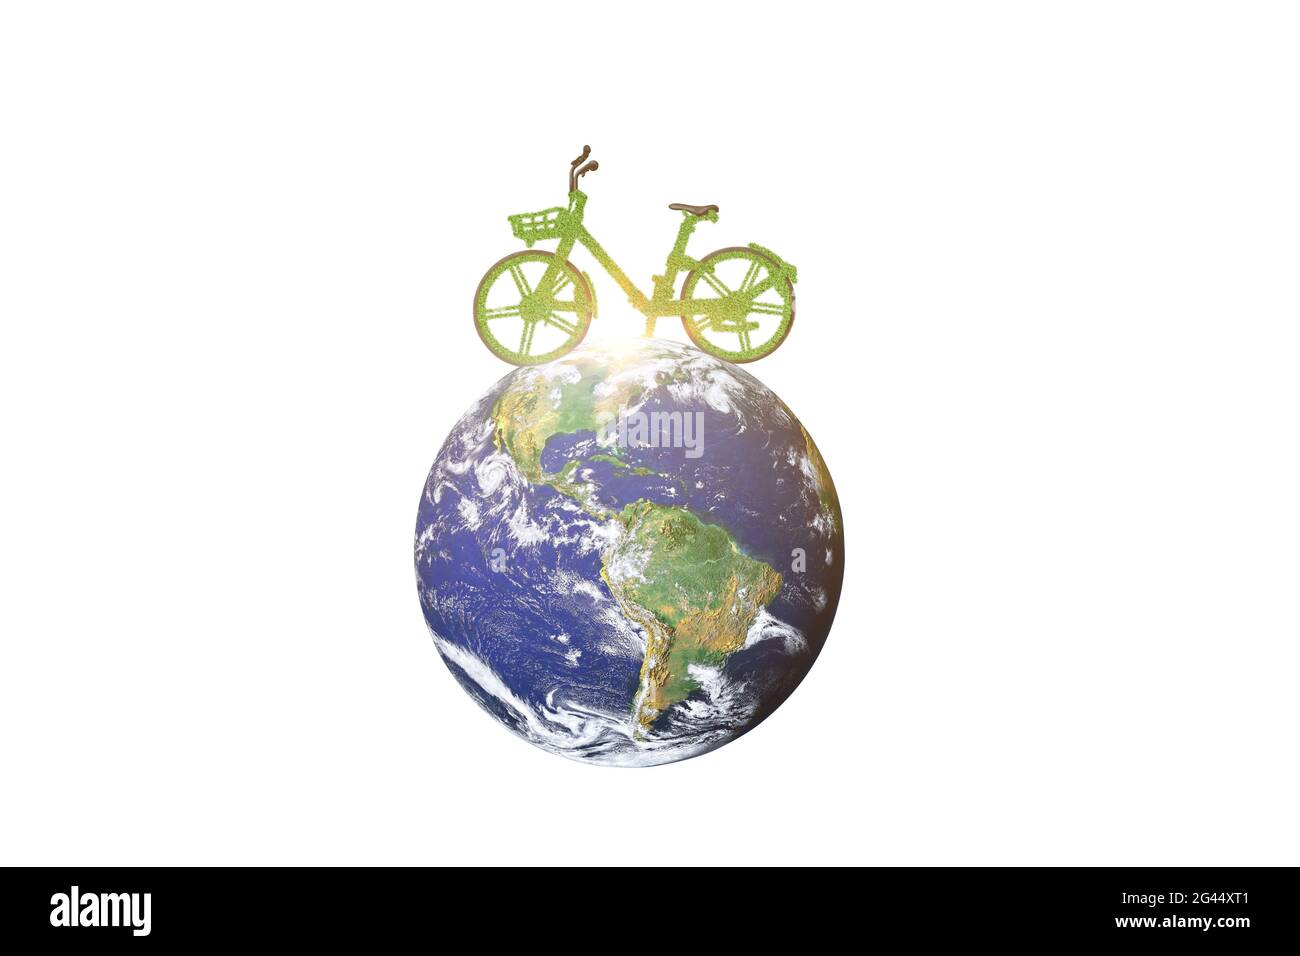 Green ecological bicycle on globe isolated on white background. Environmentally friendly concept. image furnished by NASA Stock Photo